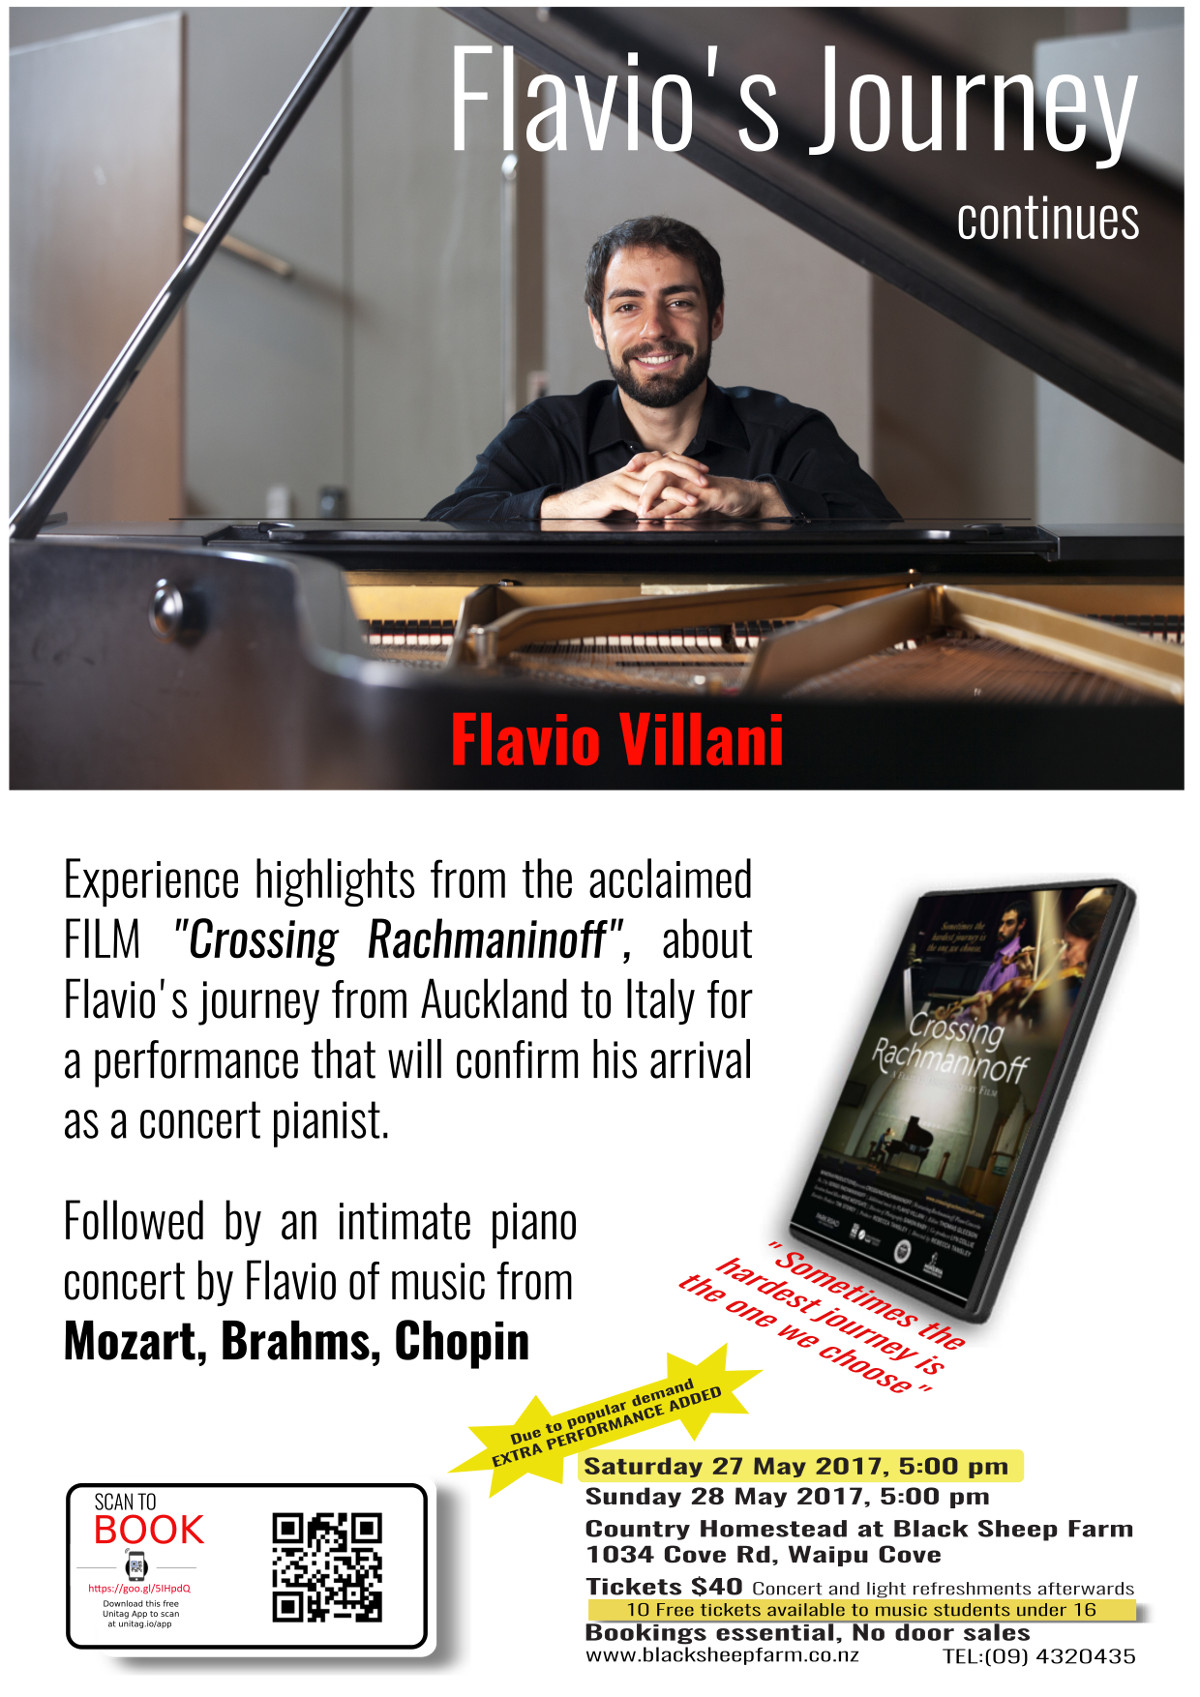 Waipu Hose Concert, Pianist Flavio Villani , Country Homesteads, Lisa and Anthony Uphof  presents excerpts from Flavio's acclaimed  Biographical Film "Crossing Rachmaninoff" followed by performance by Flavios of works by Mozart, Brahms and Chopin. This concert is titled Flavio's Journey continues